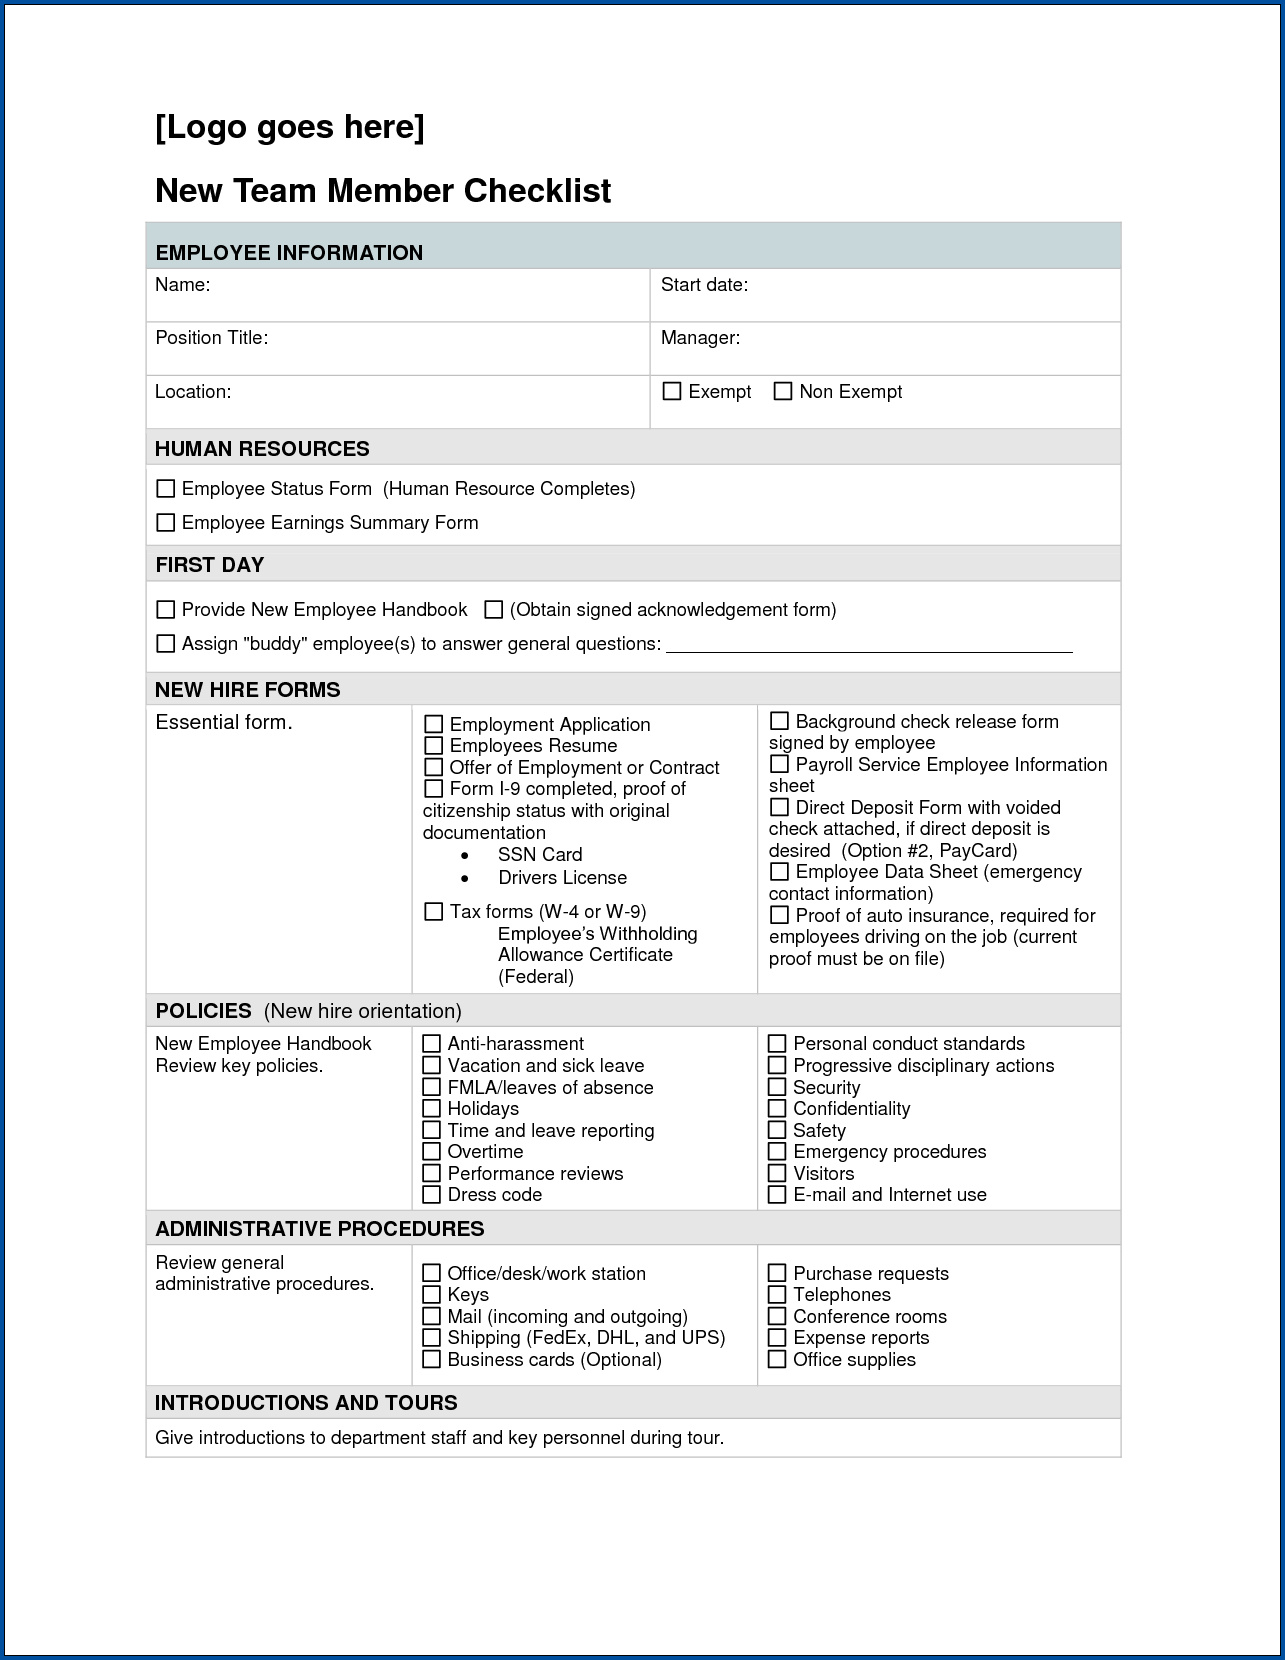 Example of Hiring Checklist Template